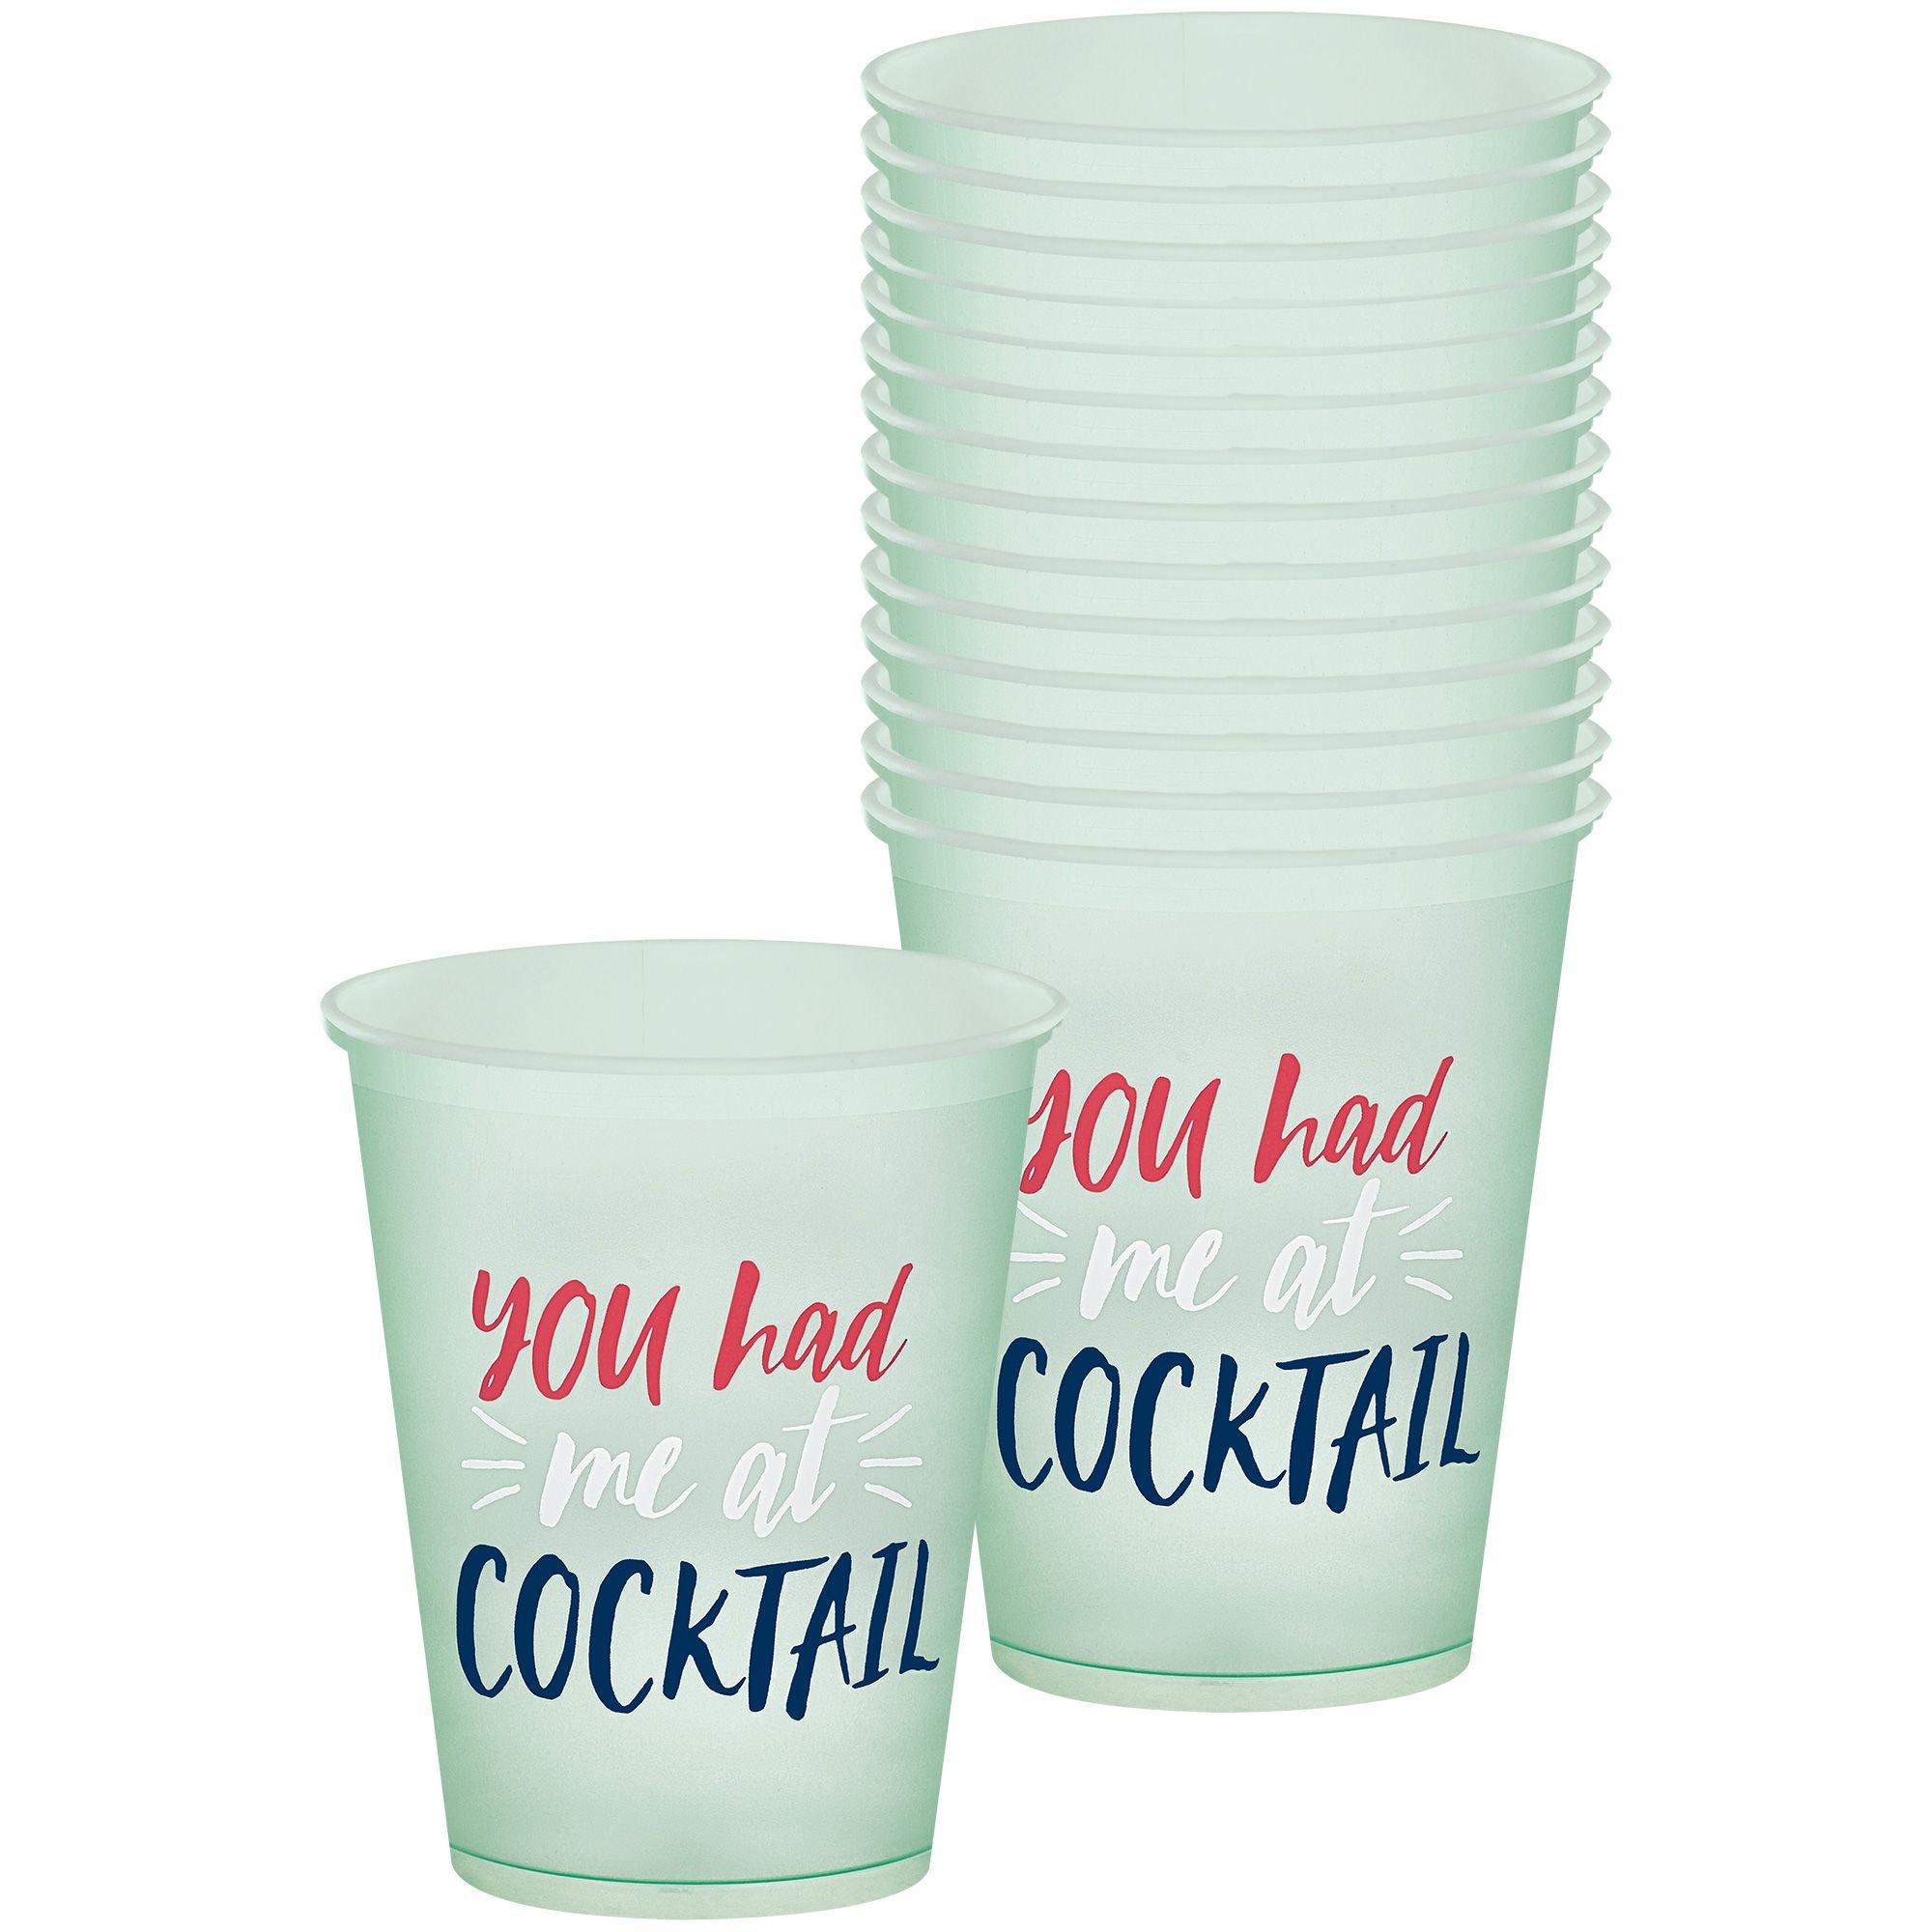 Should You Serve Cocktails In Plastic Cups?